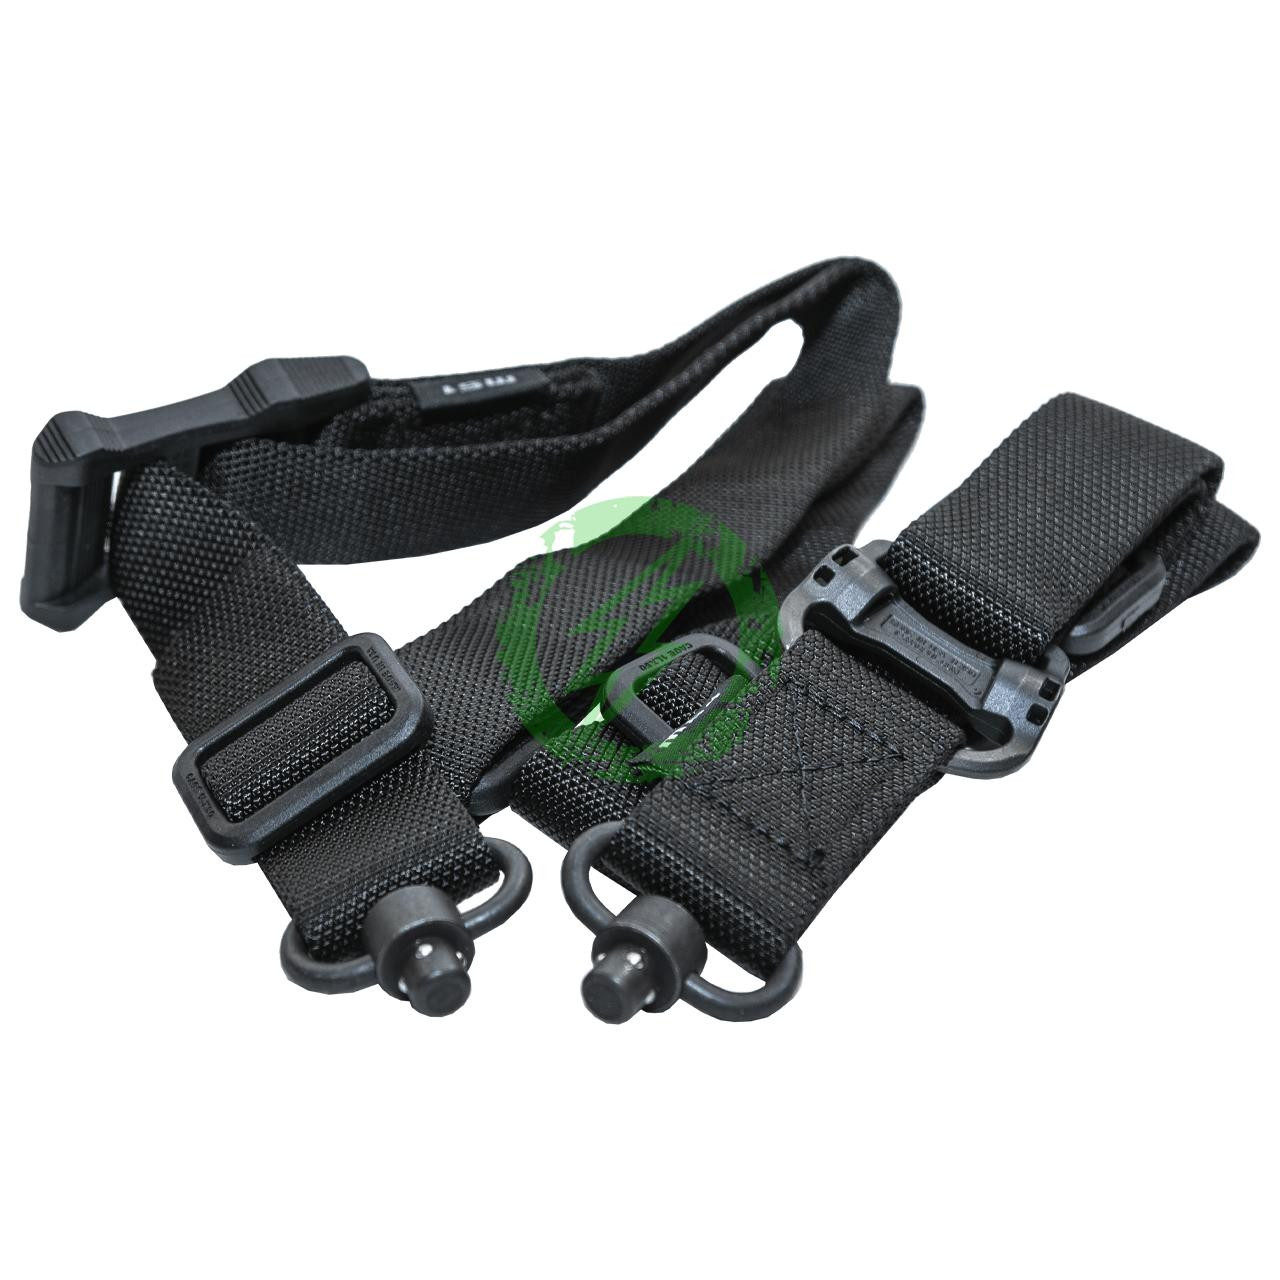  MAGPUL MS4 Dual QD Multi Mission Sling GEN 2 | Black, Ranger Green, and Coyote 